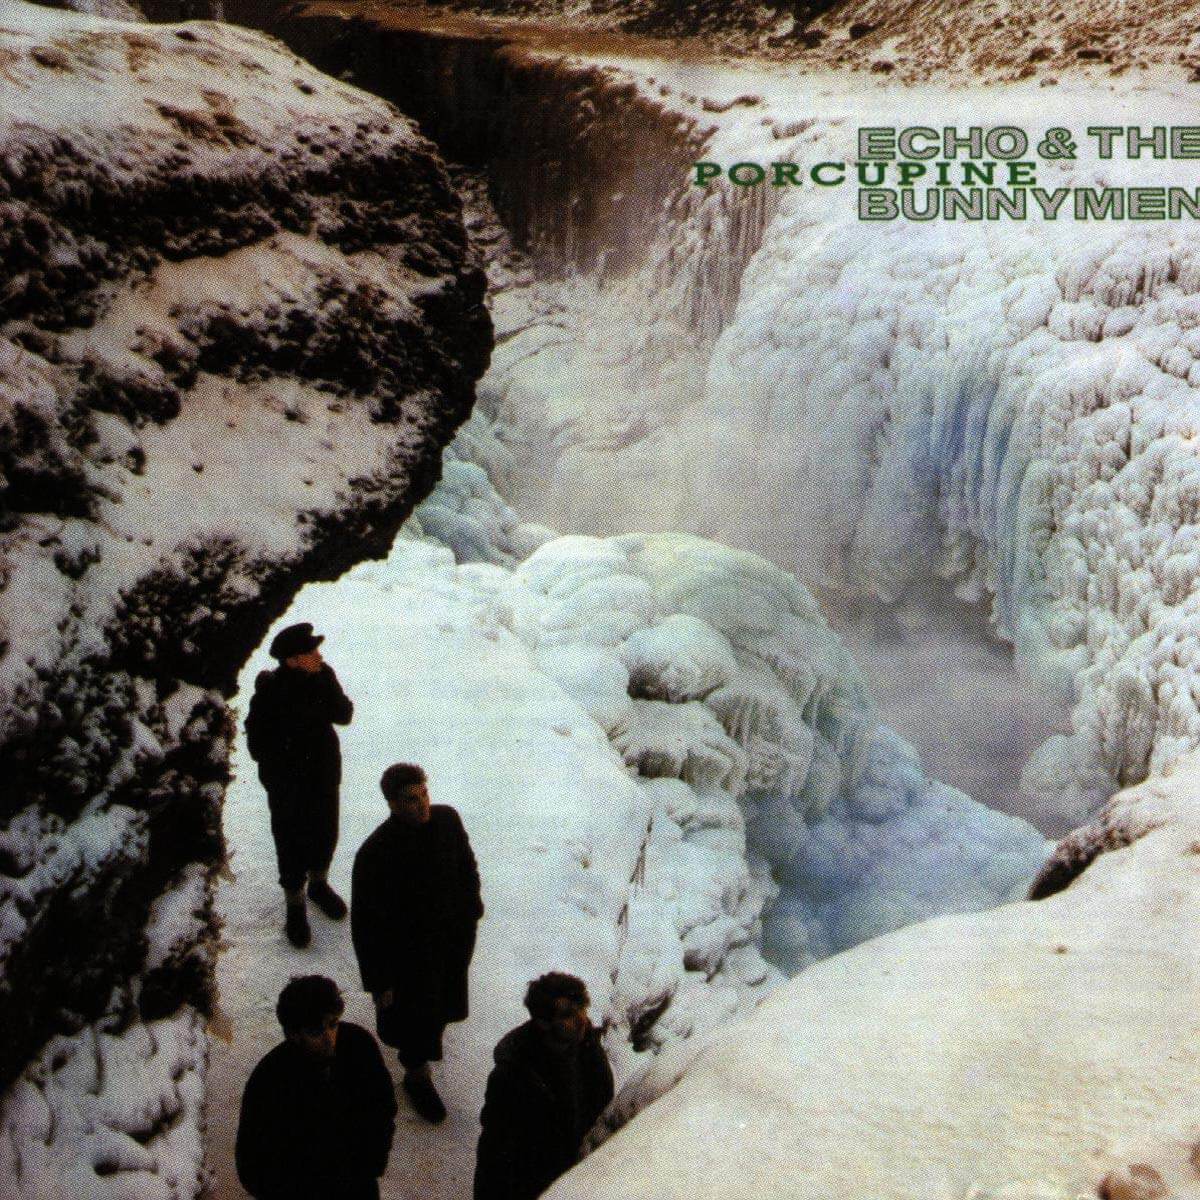 Porcupine by Echo and the Bunnymen